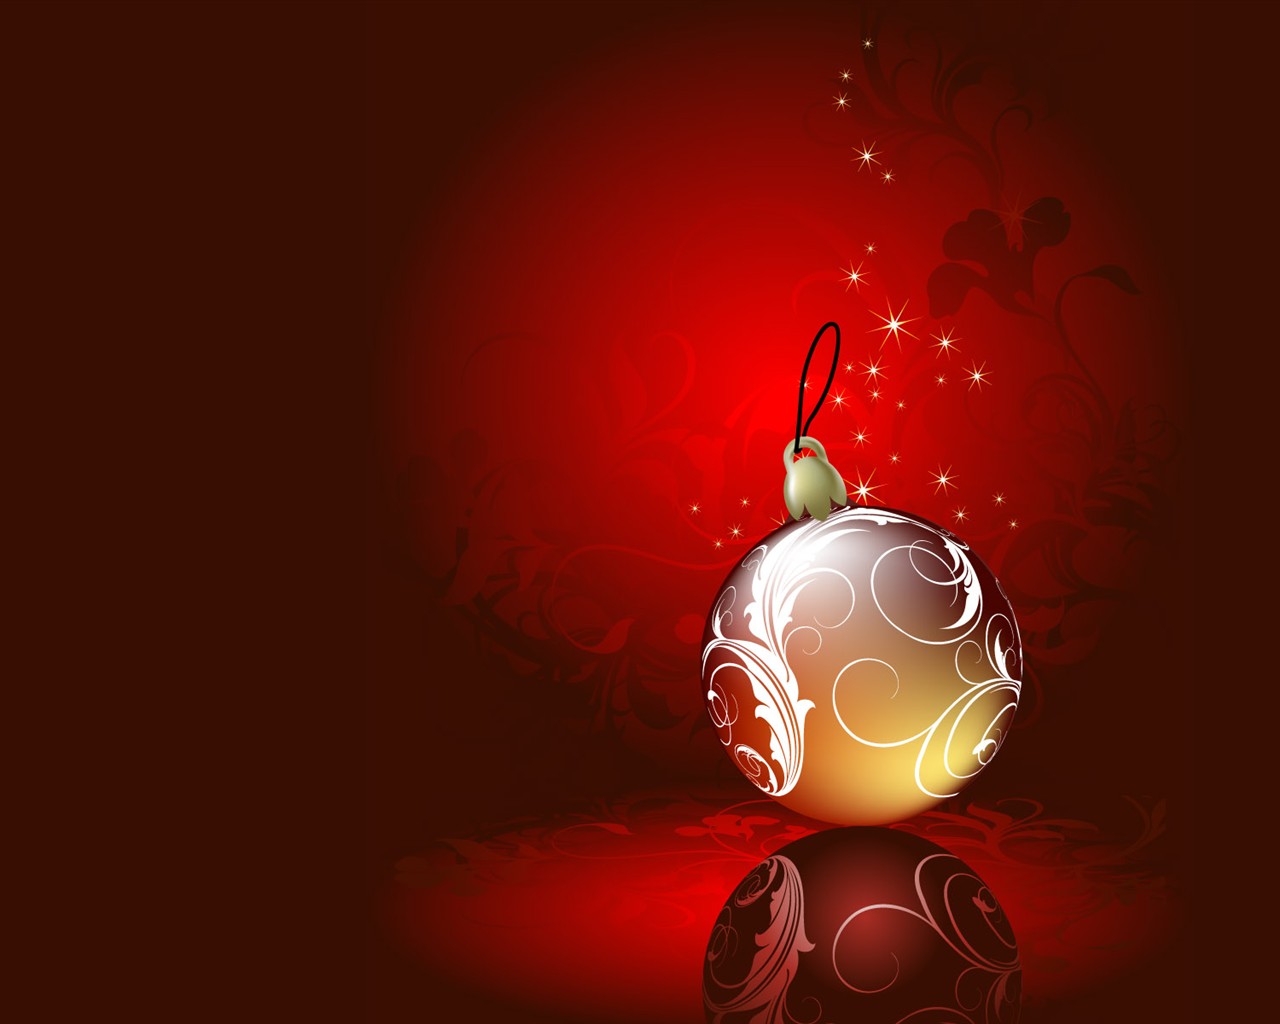 Exquisite Christmas Theme HD Wallpapers #28 - 1280x1024